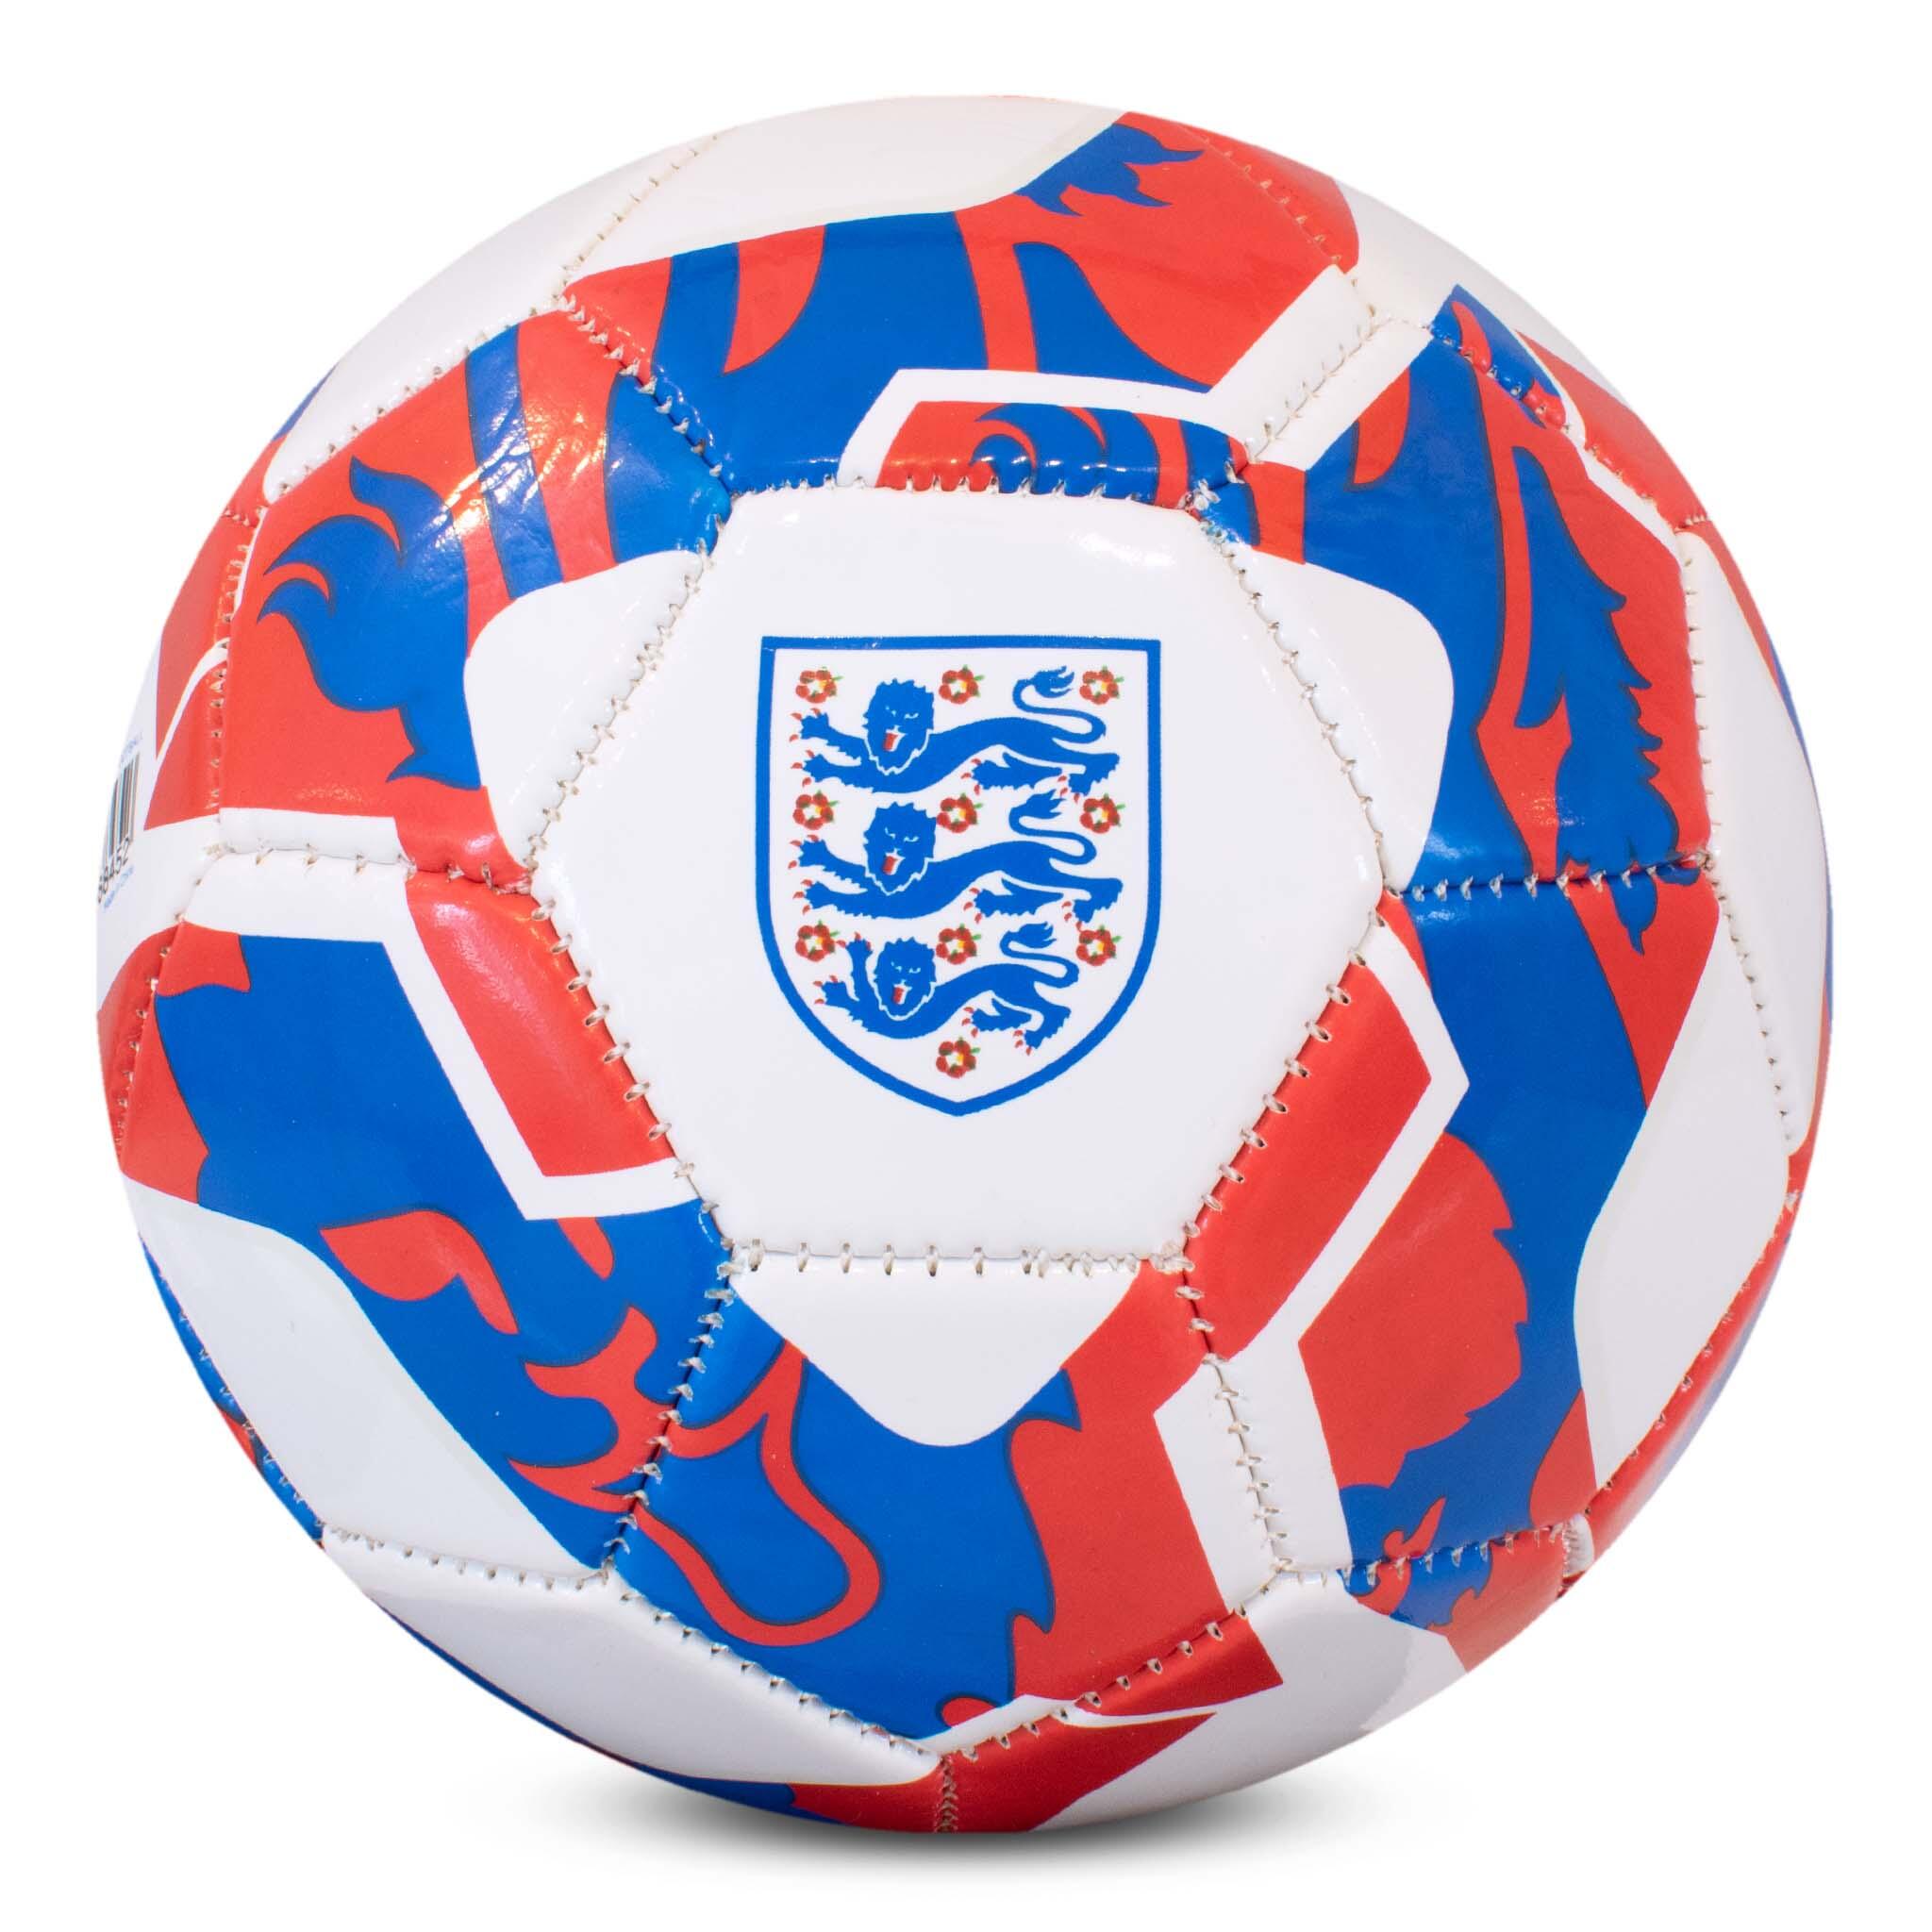 England Supporter Football Size 1 White Blue Red 3/4